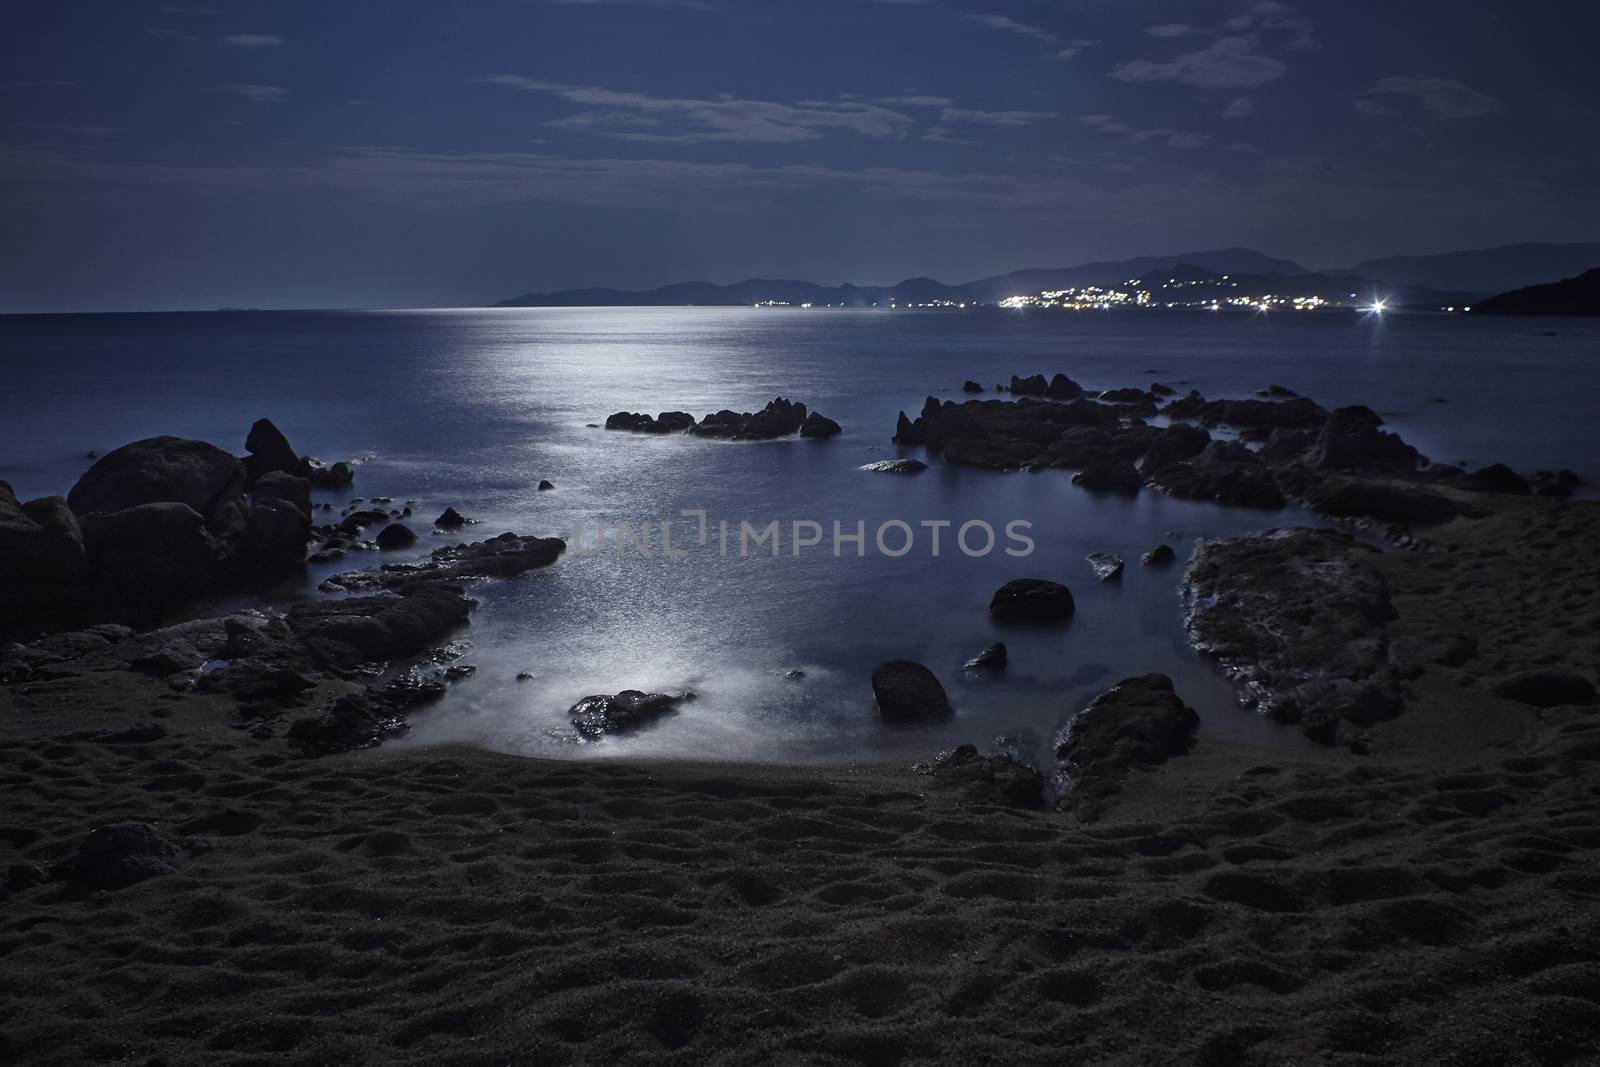 The peace and tranquility of the sea at night by pippocarlot